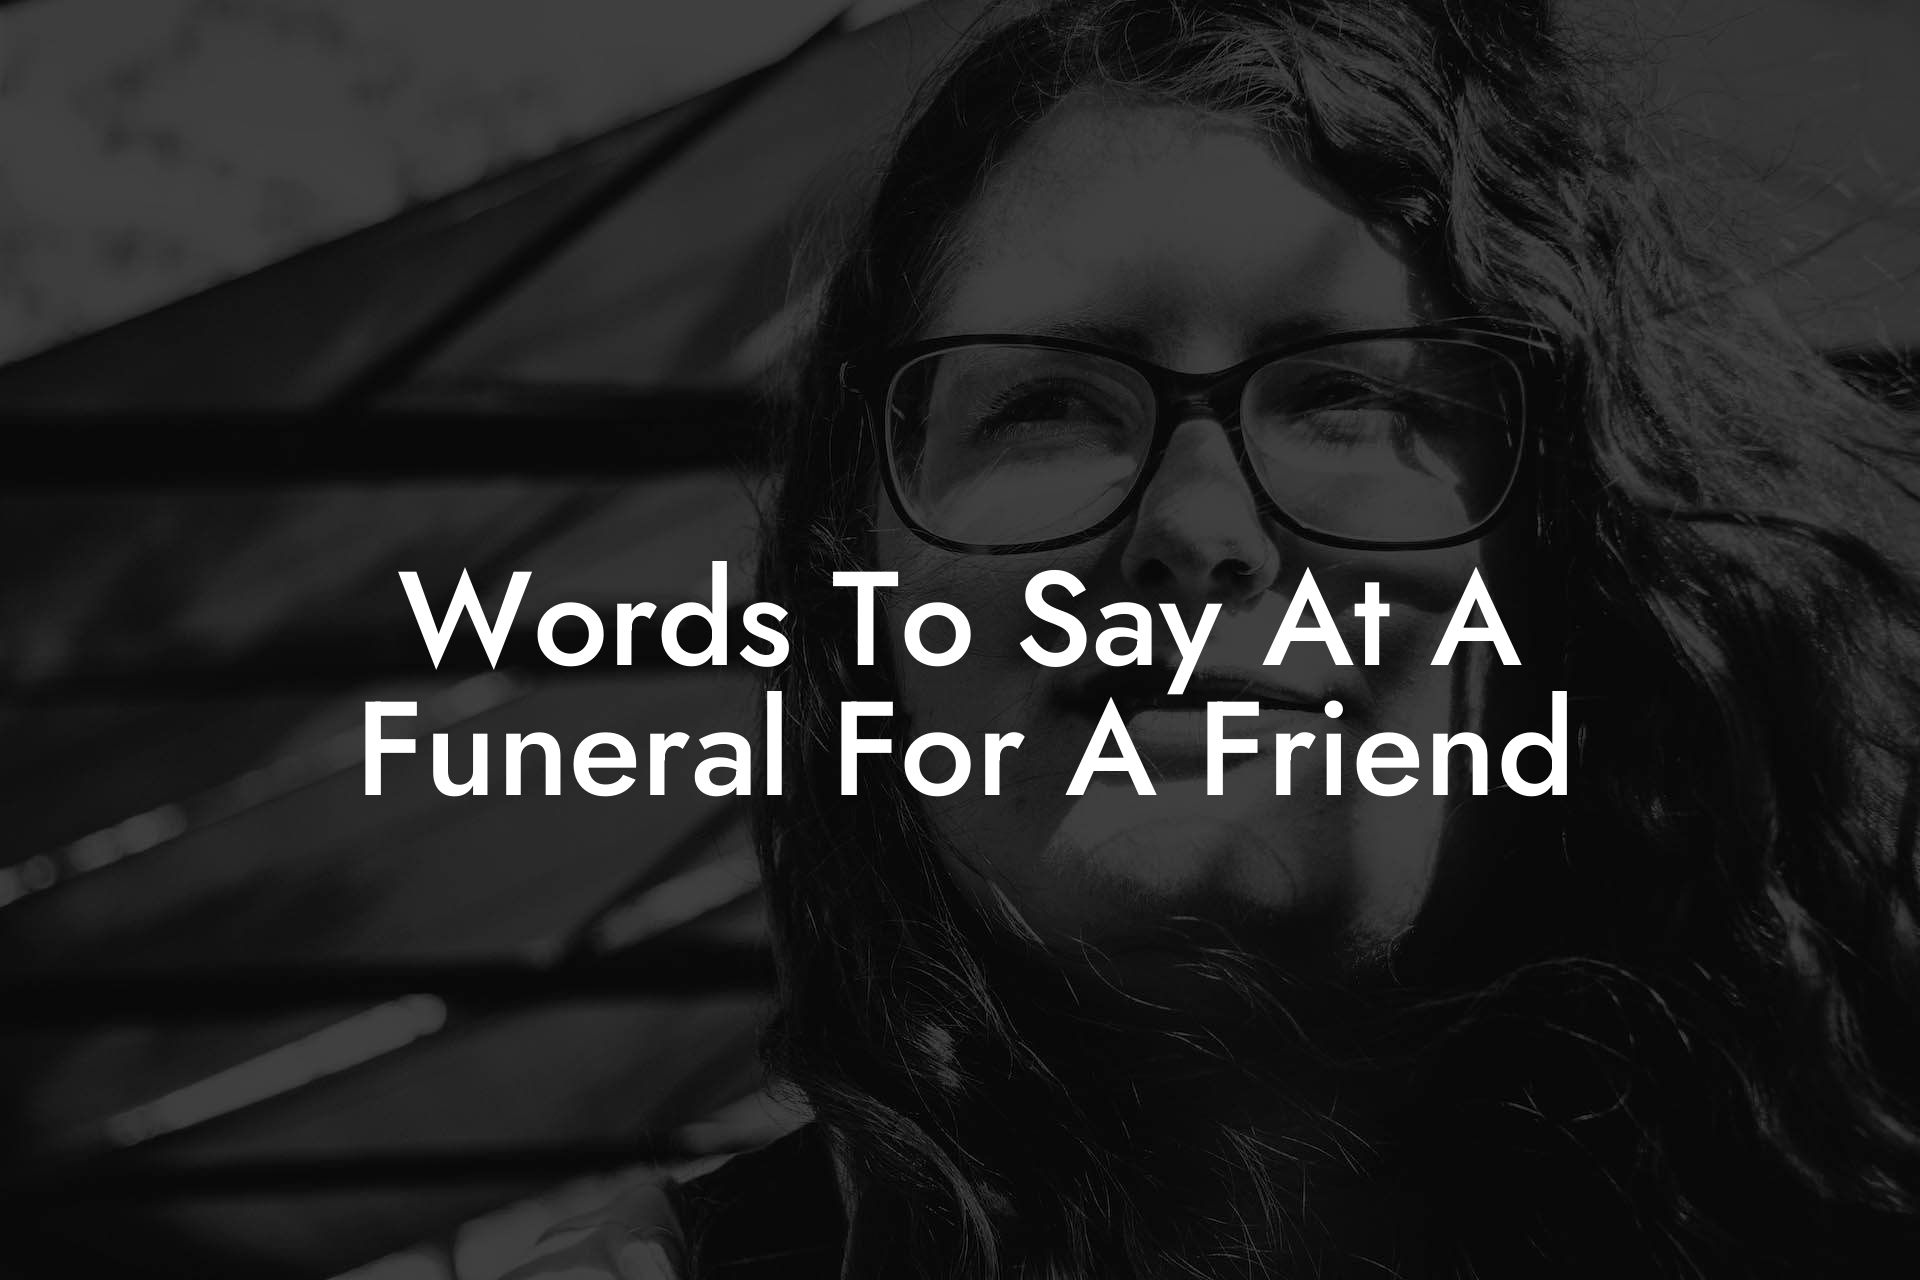 Words To Say At A Funeral For A Friend